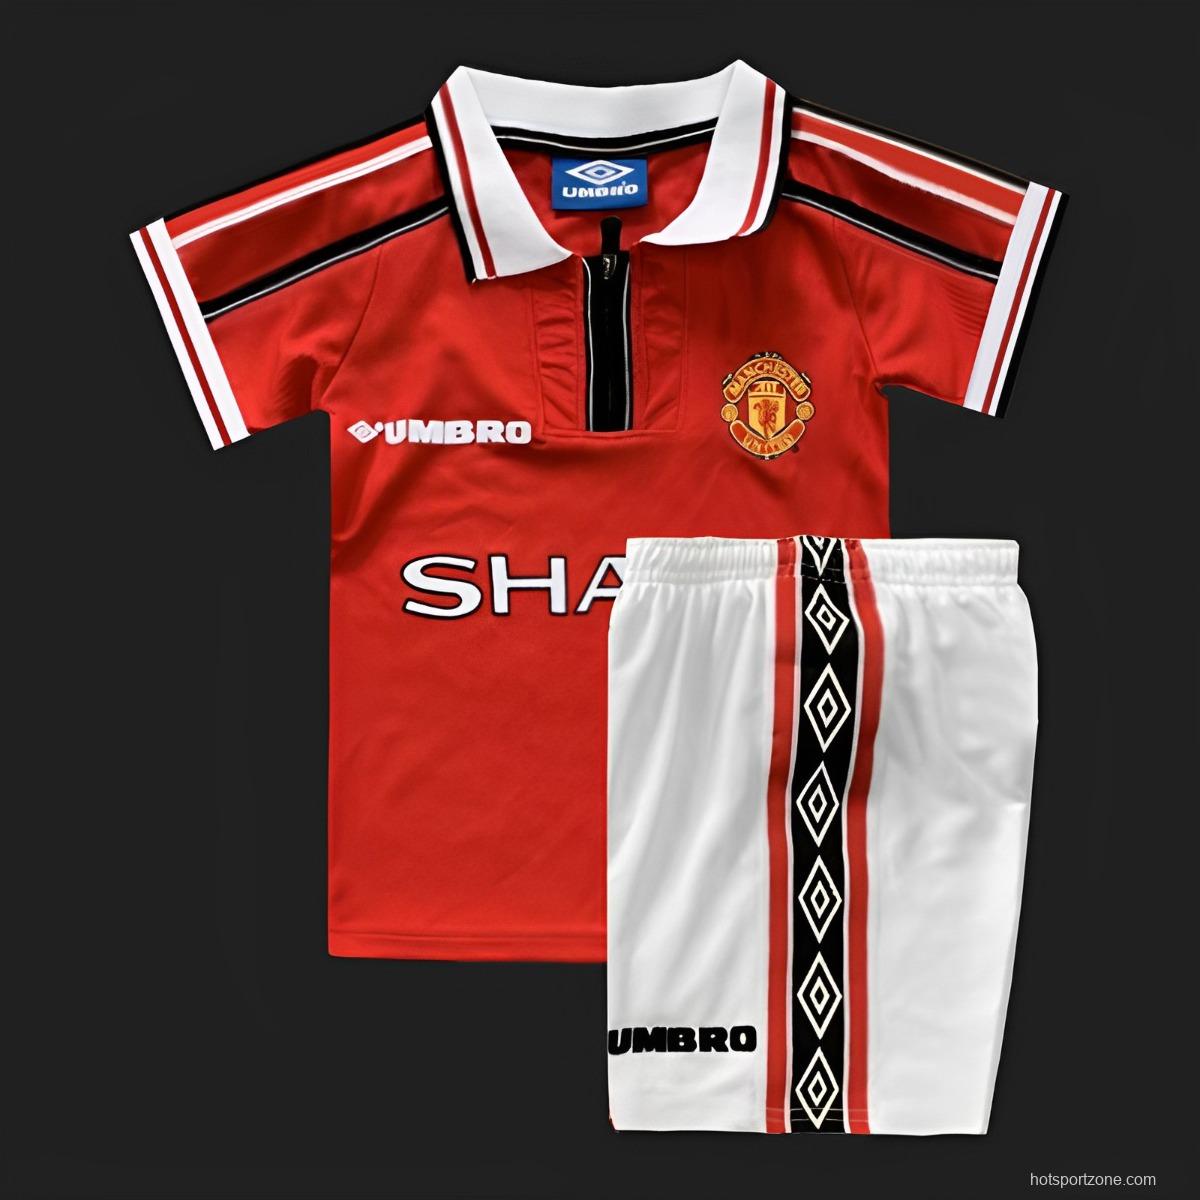 Retro Kids 98/99 Manchester United Home Jersey